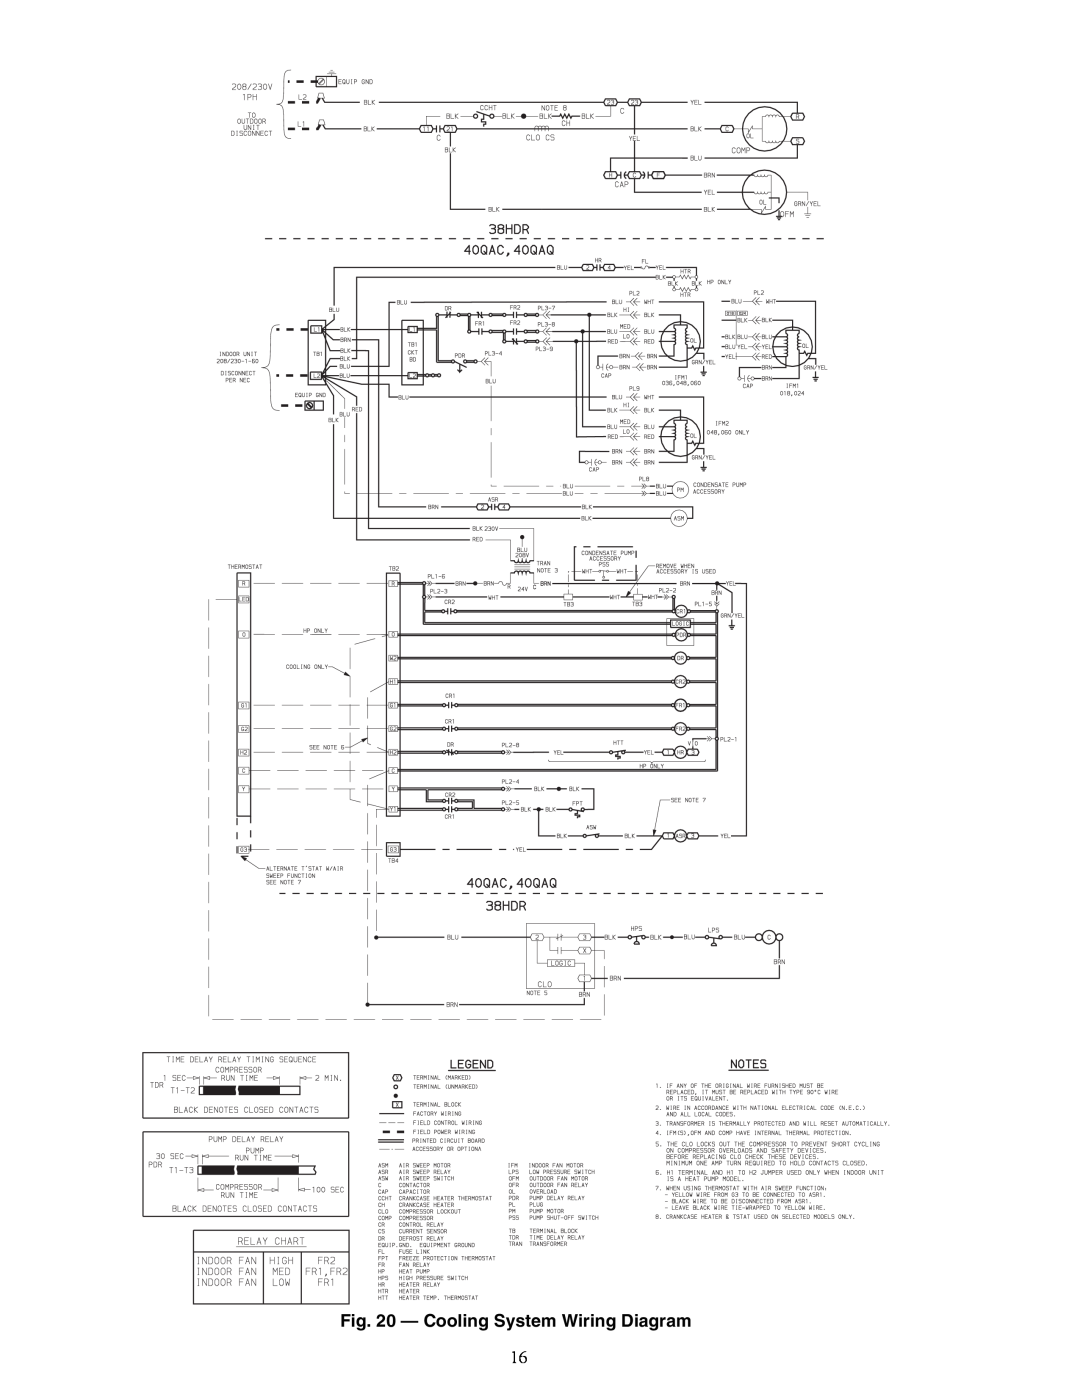 Carrier 40QA024-060 specifications Cooling System Wiring Diagram 